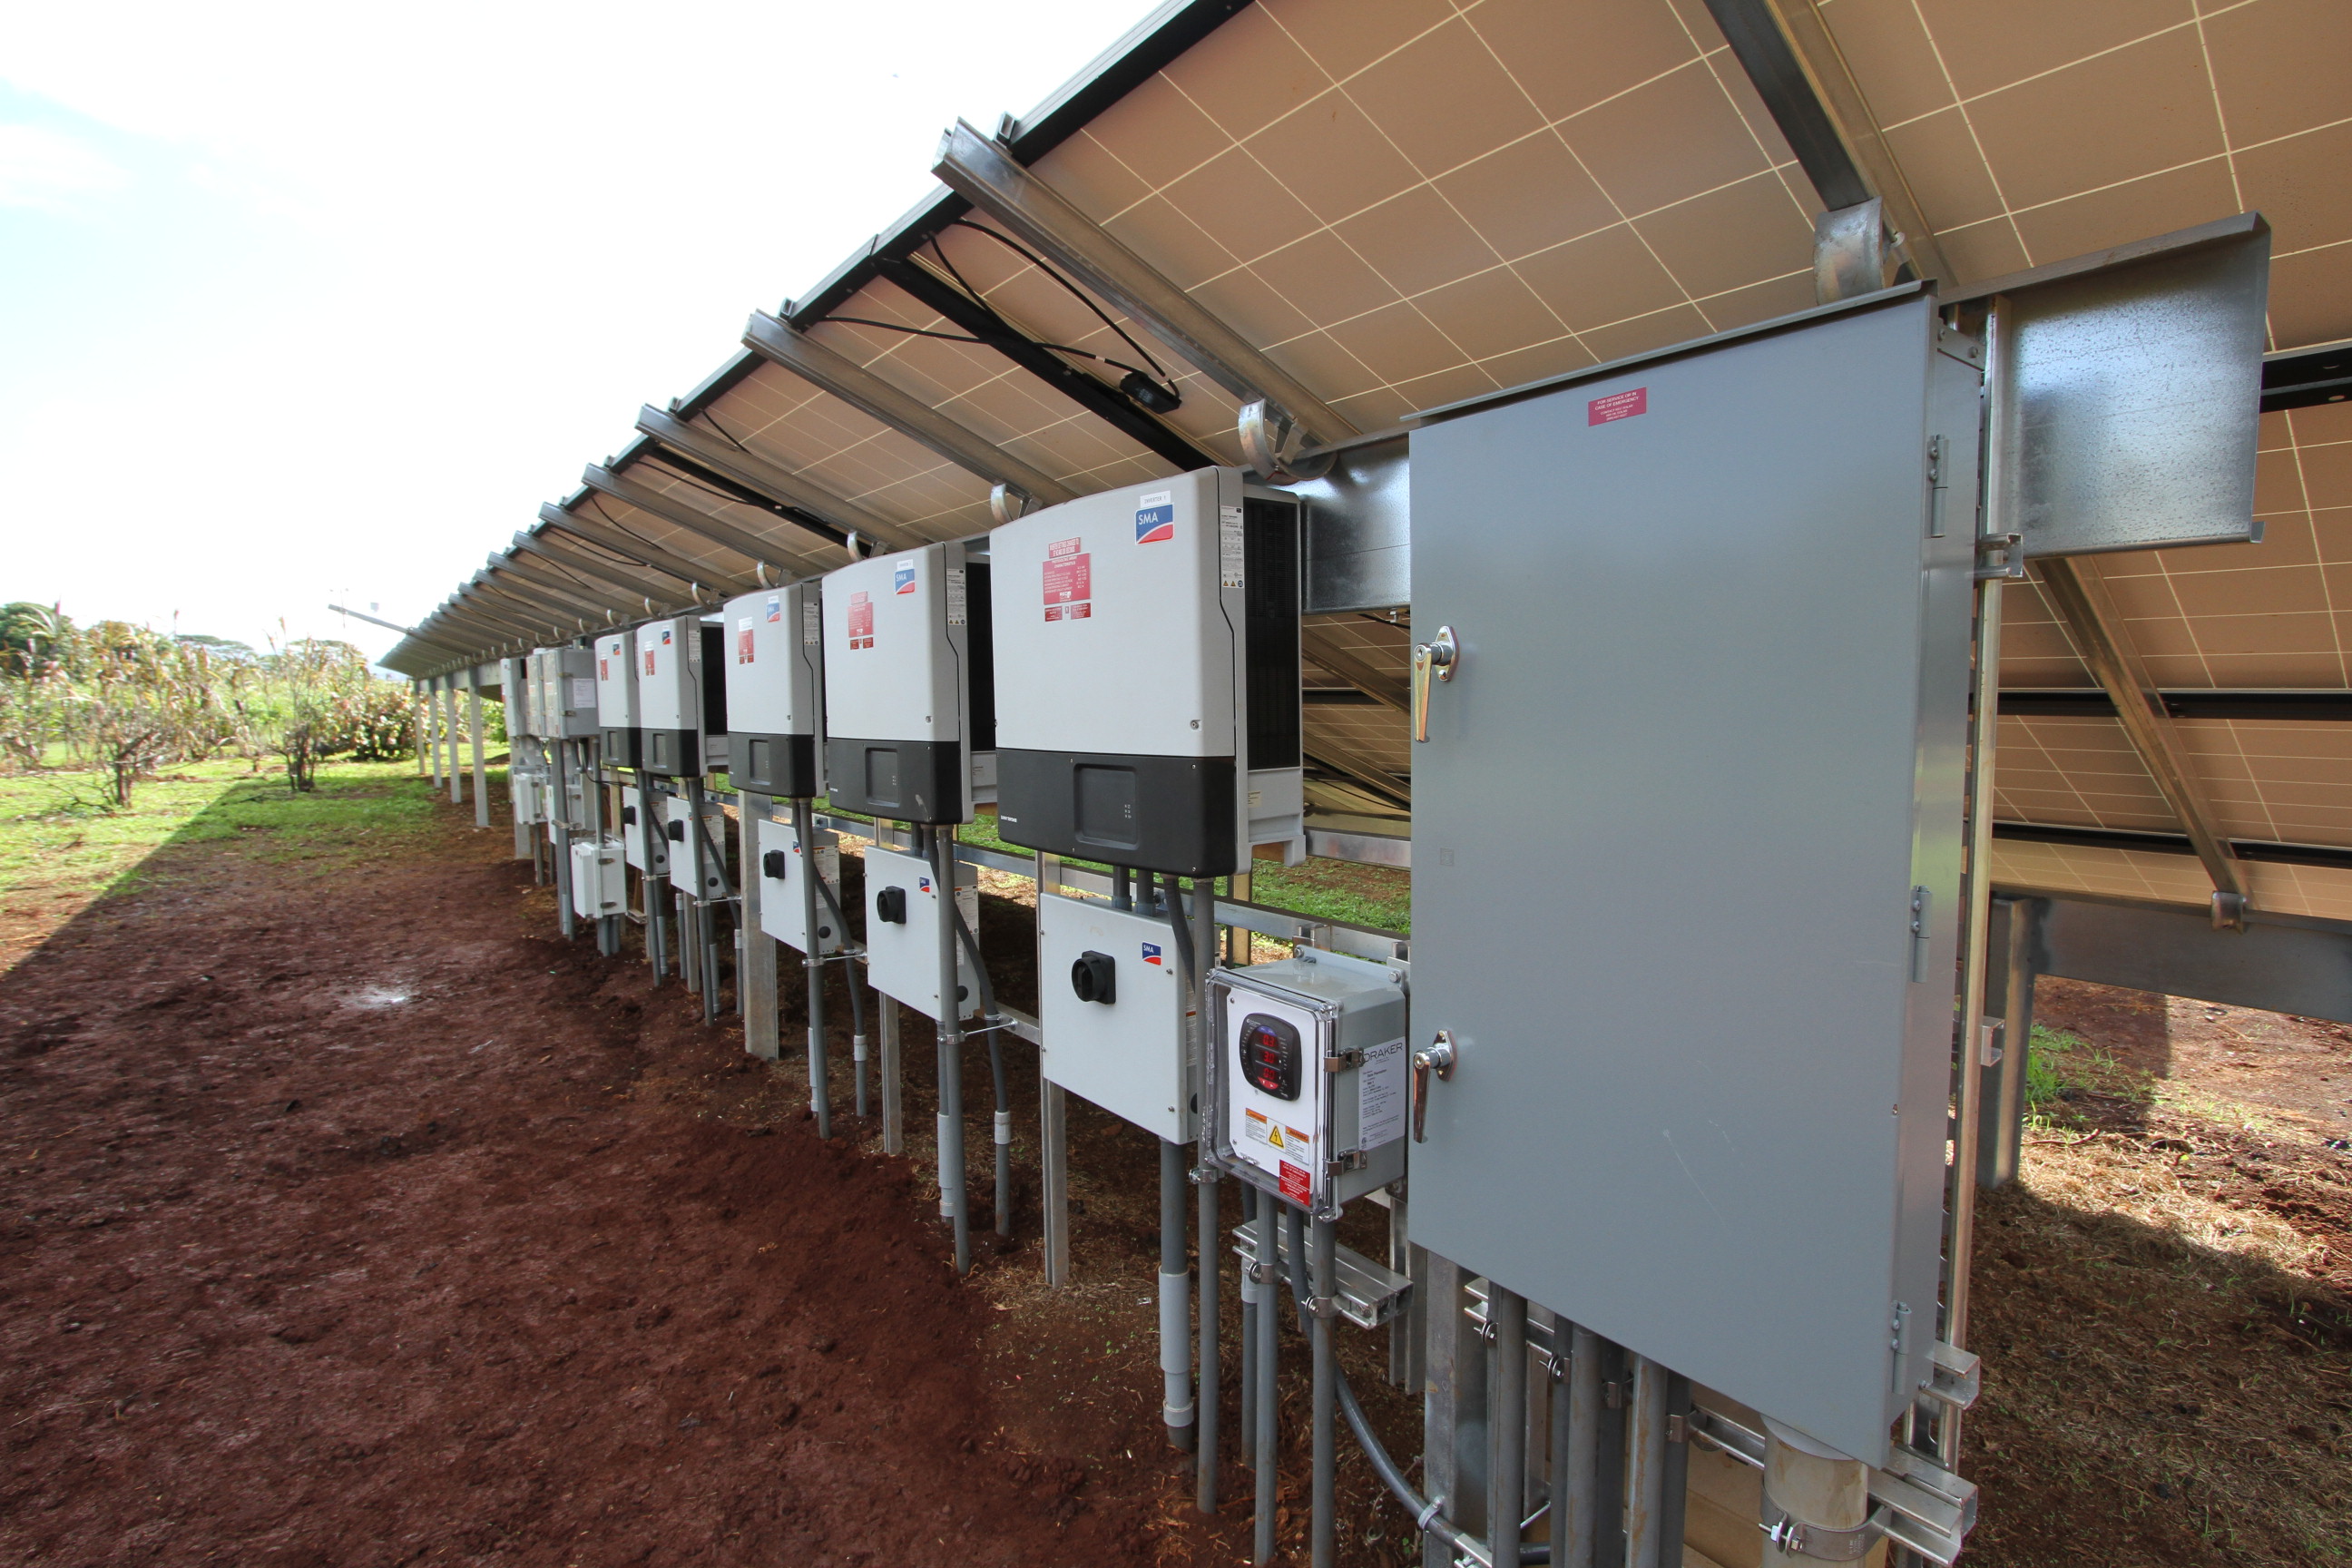 Inverters mounted behind the last row of modules, enjoying the view.